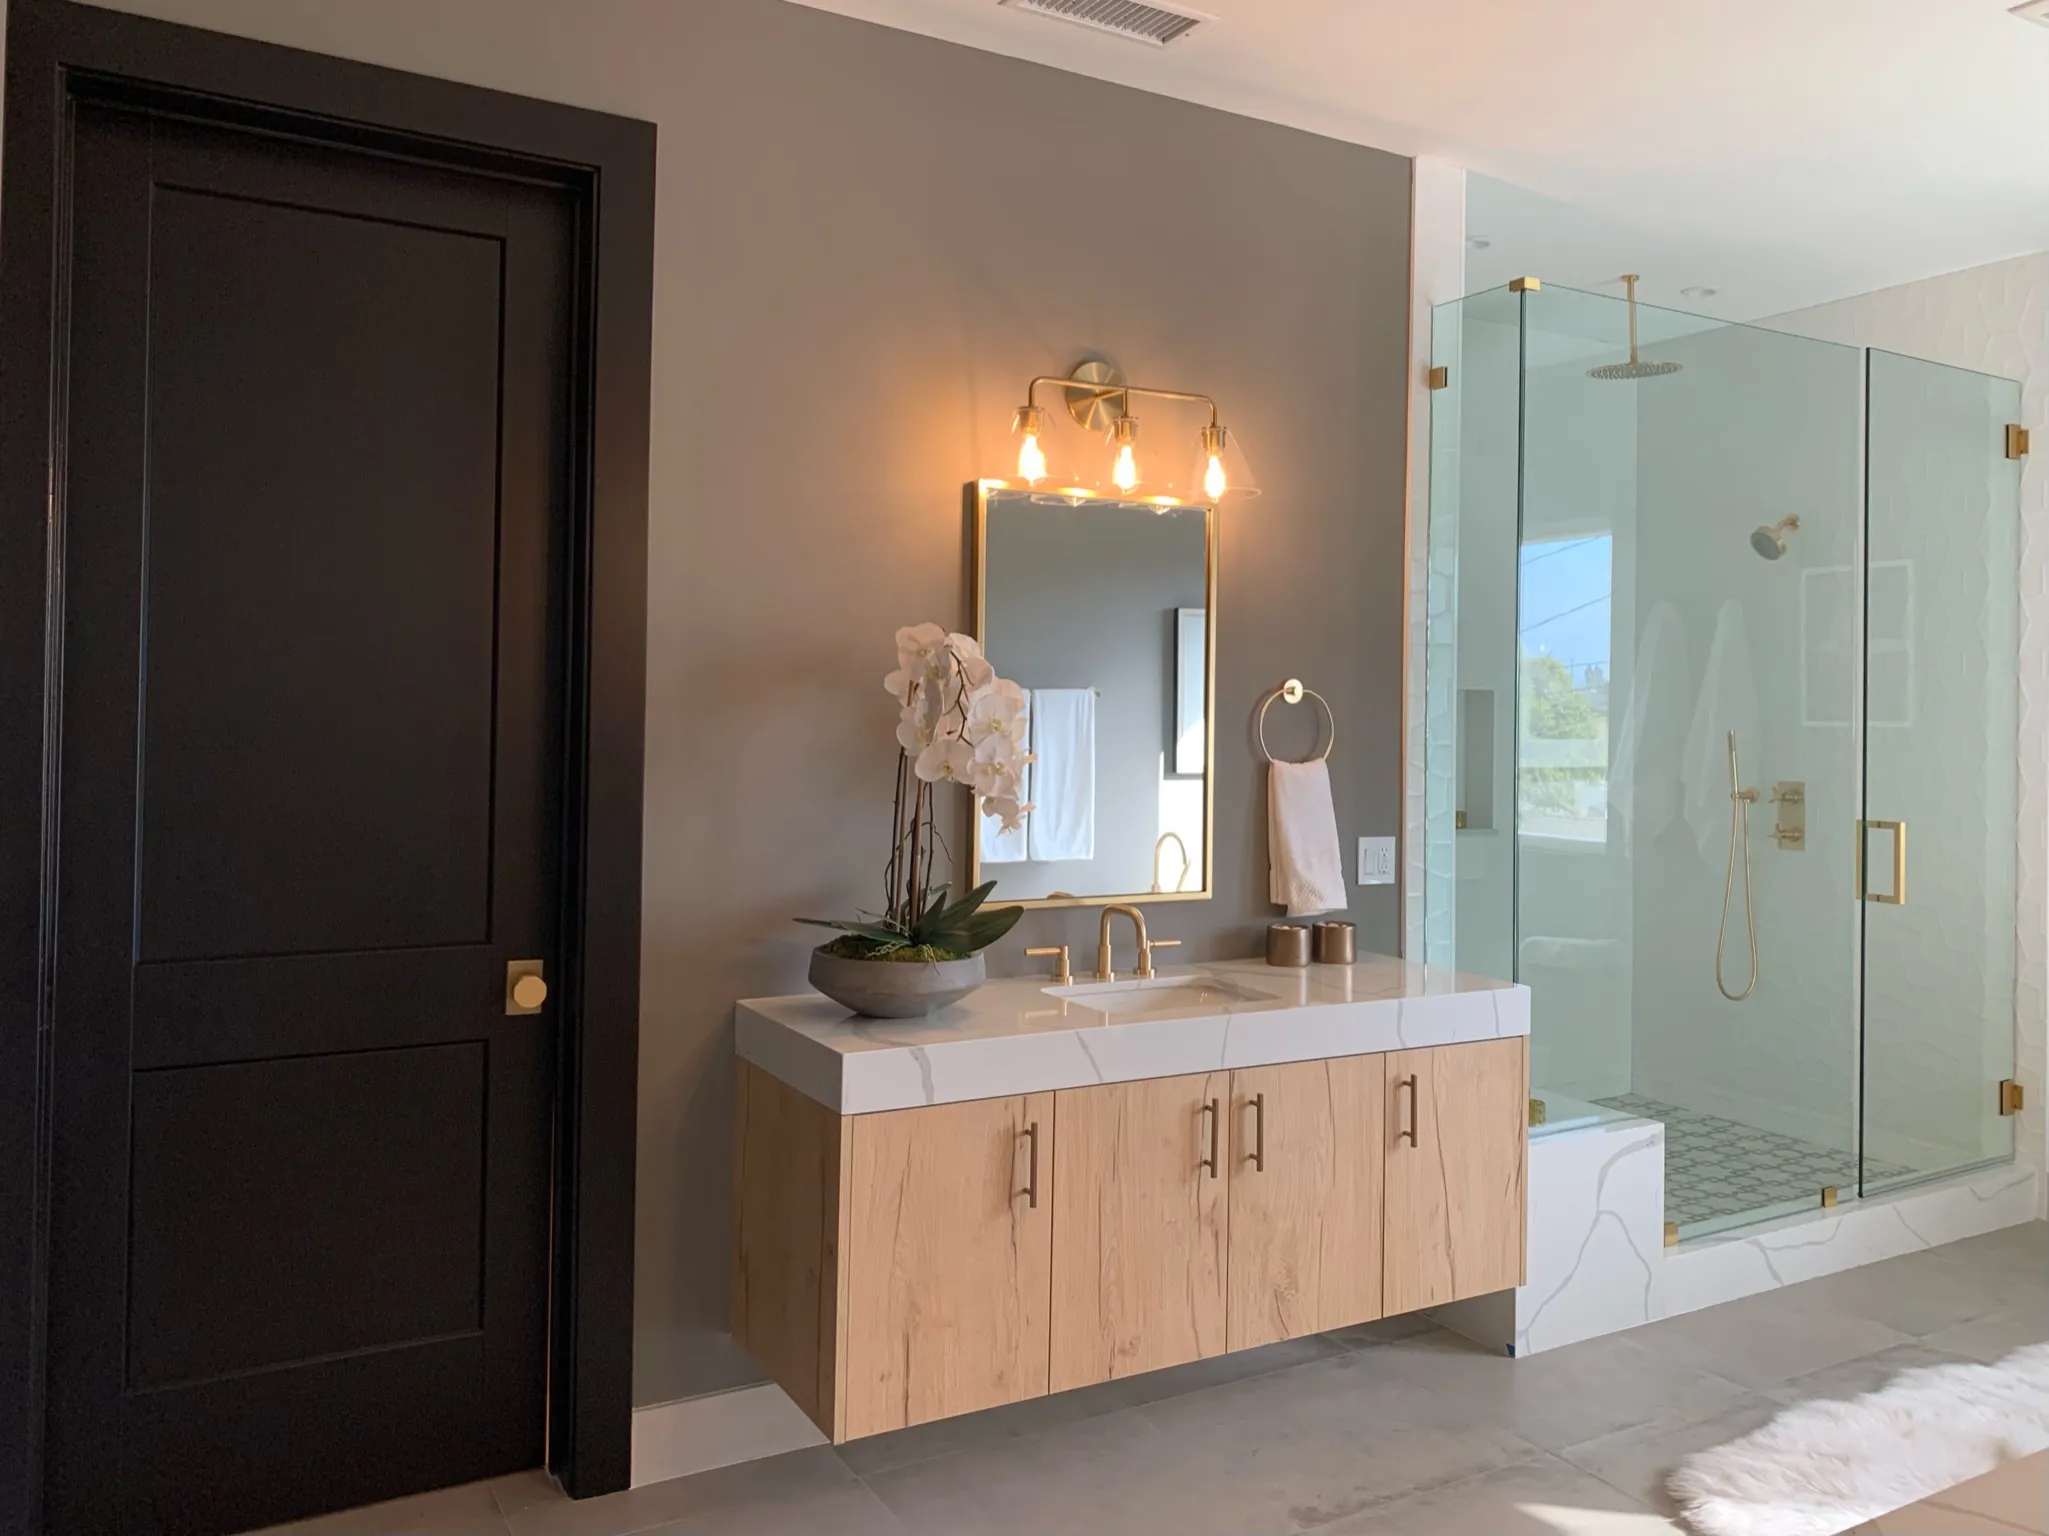 Having a powder room can help you and your guest save tons of time with energy efficiency